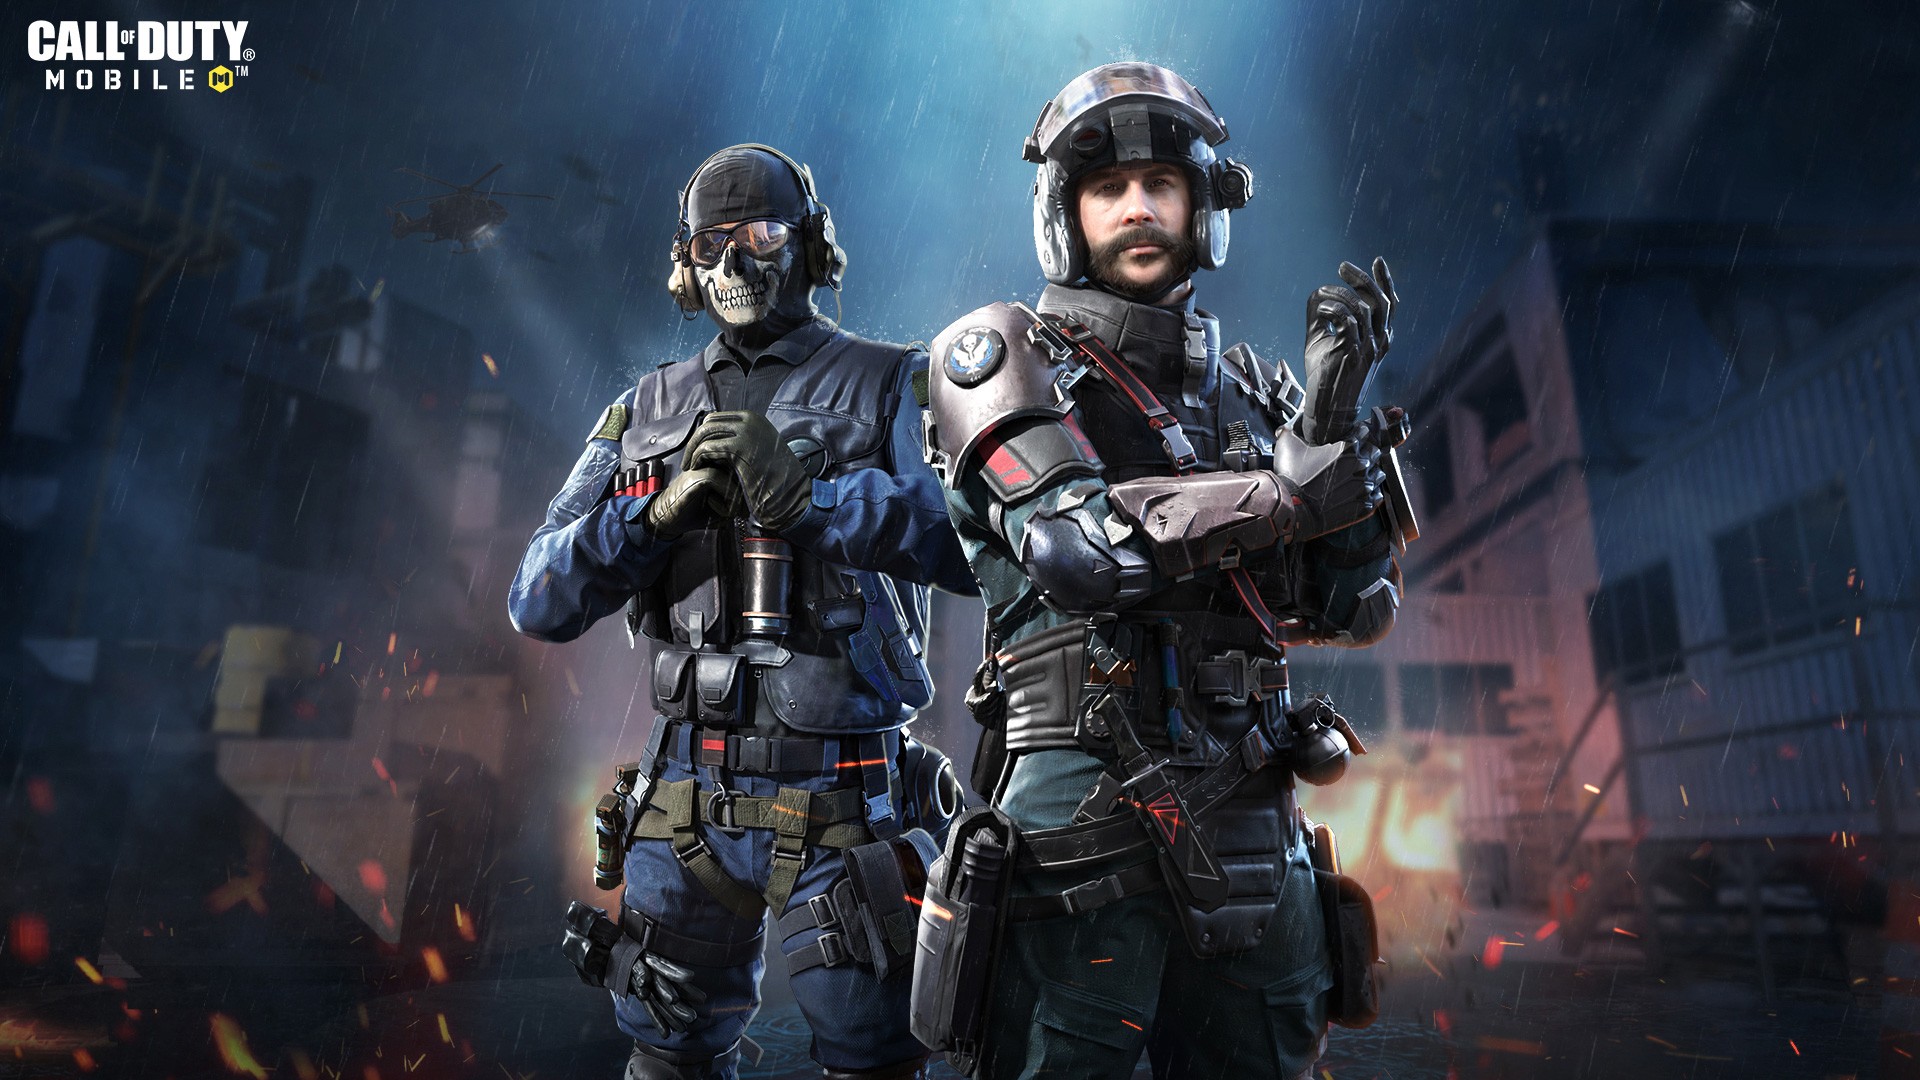 Task Force 141 Reporting For Duty In Call of Duty: Mobile S2 – Now Live